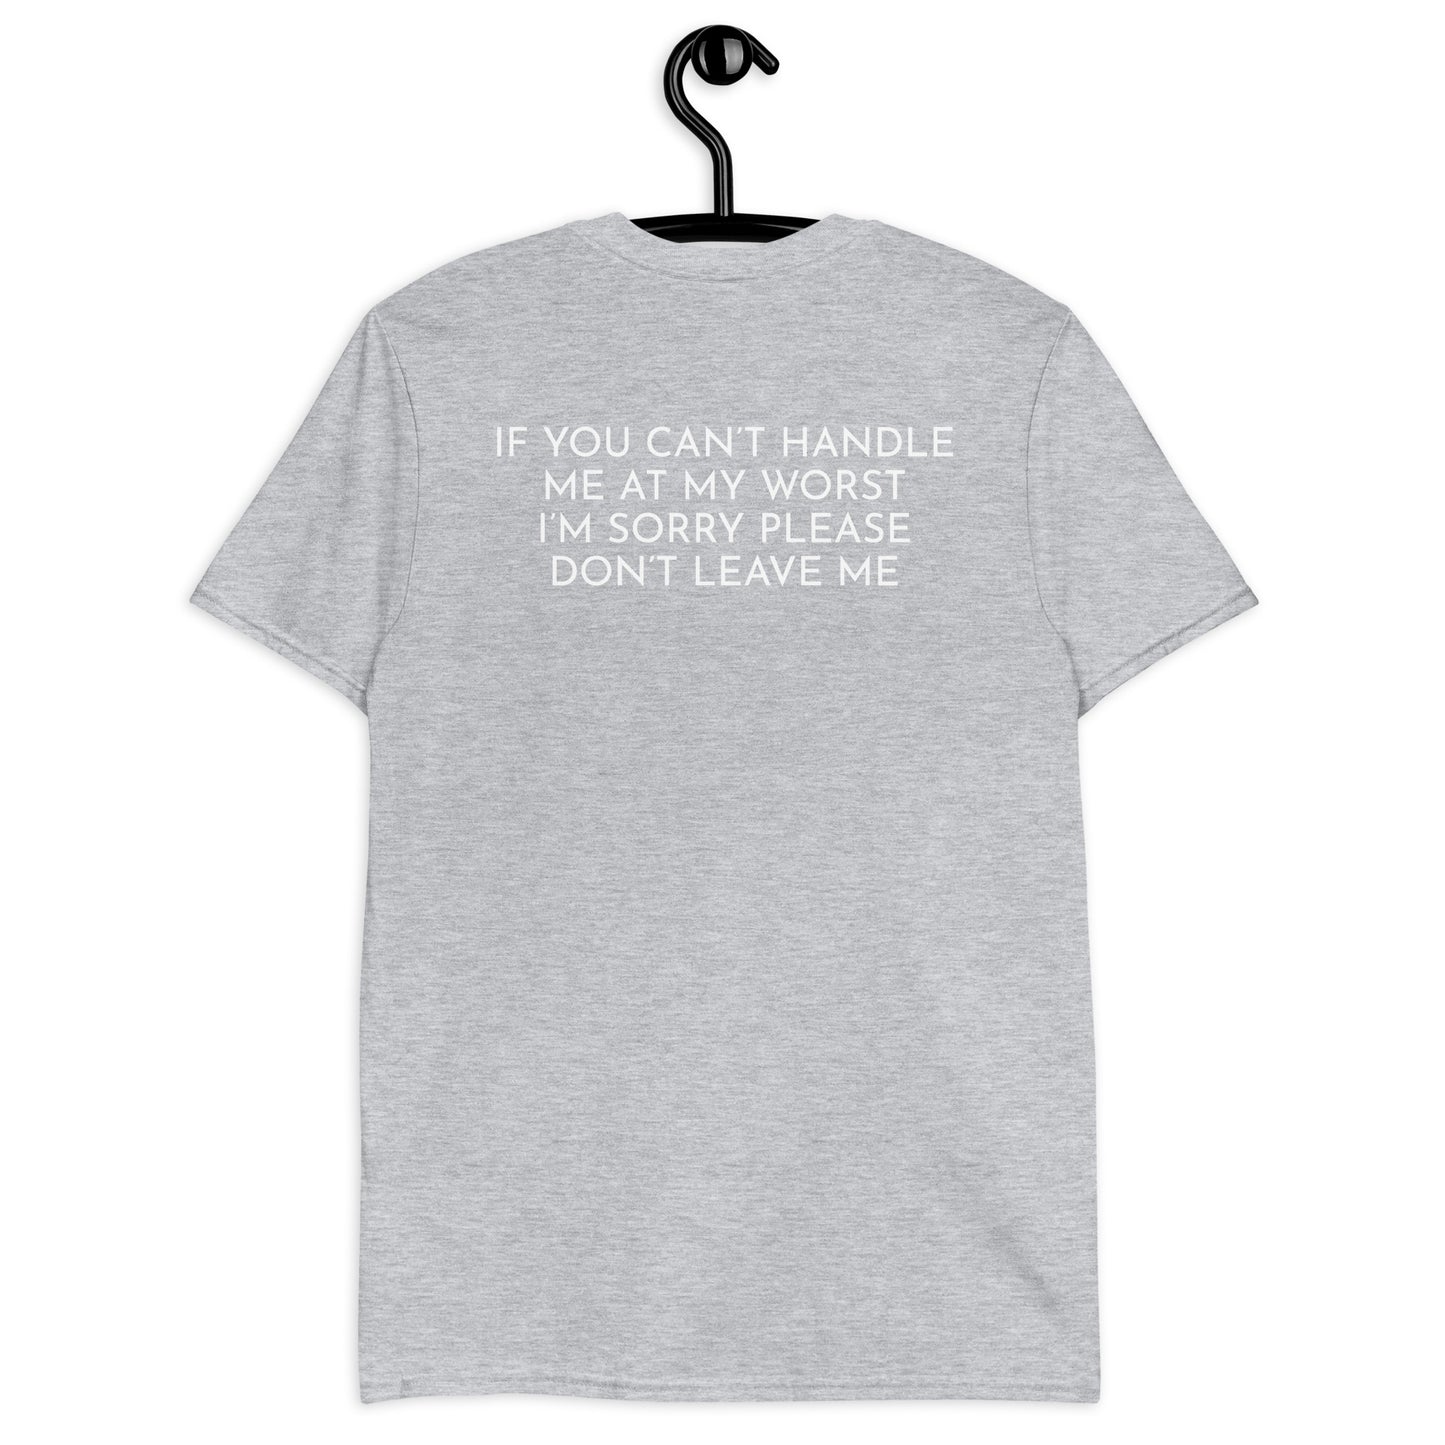 If you can't handle me at my worst, I'm sorry please don't leave me Unisex T-Shirt